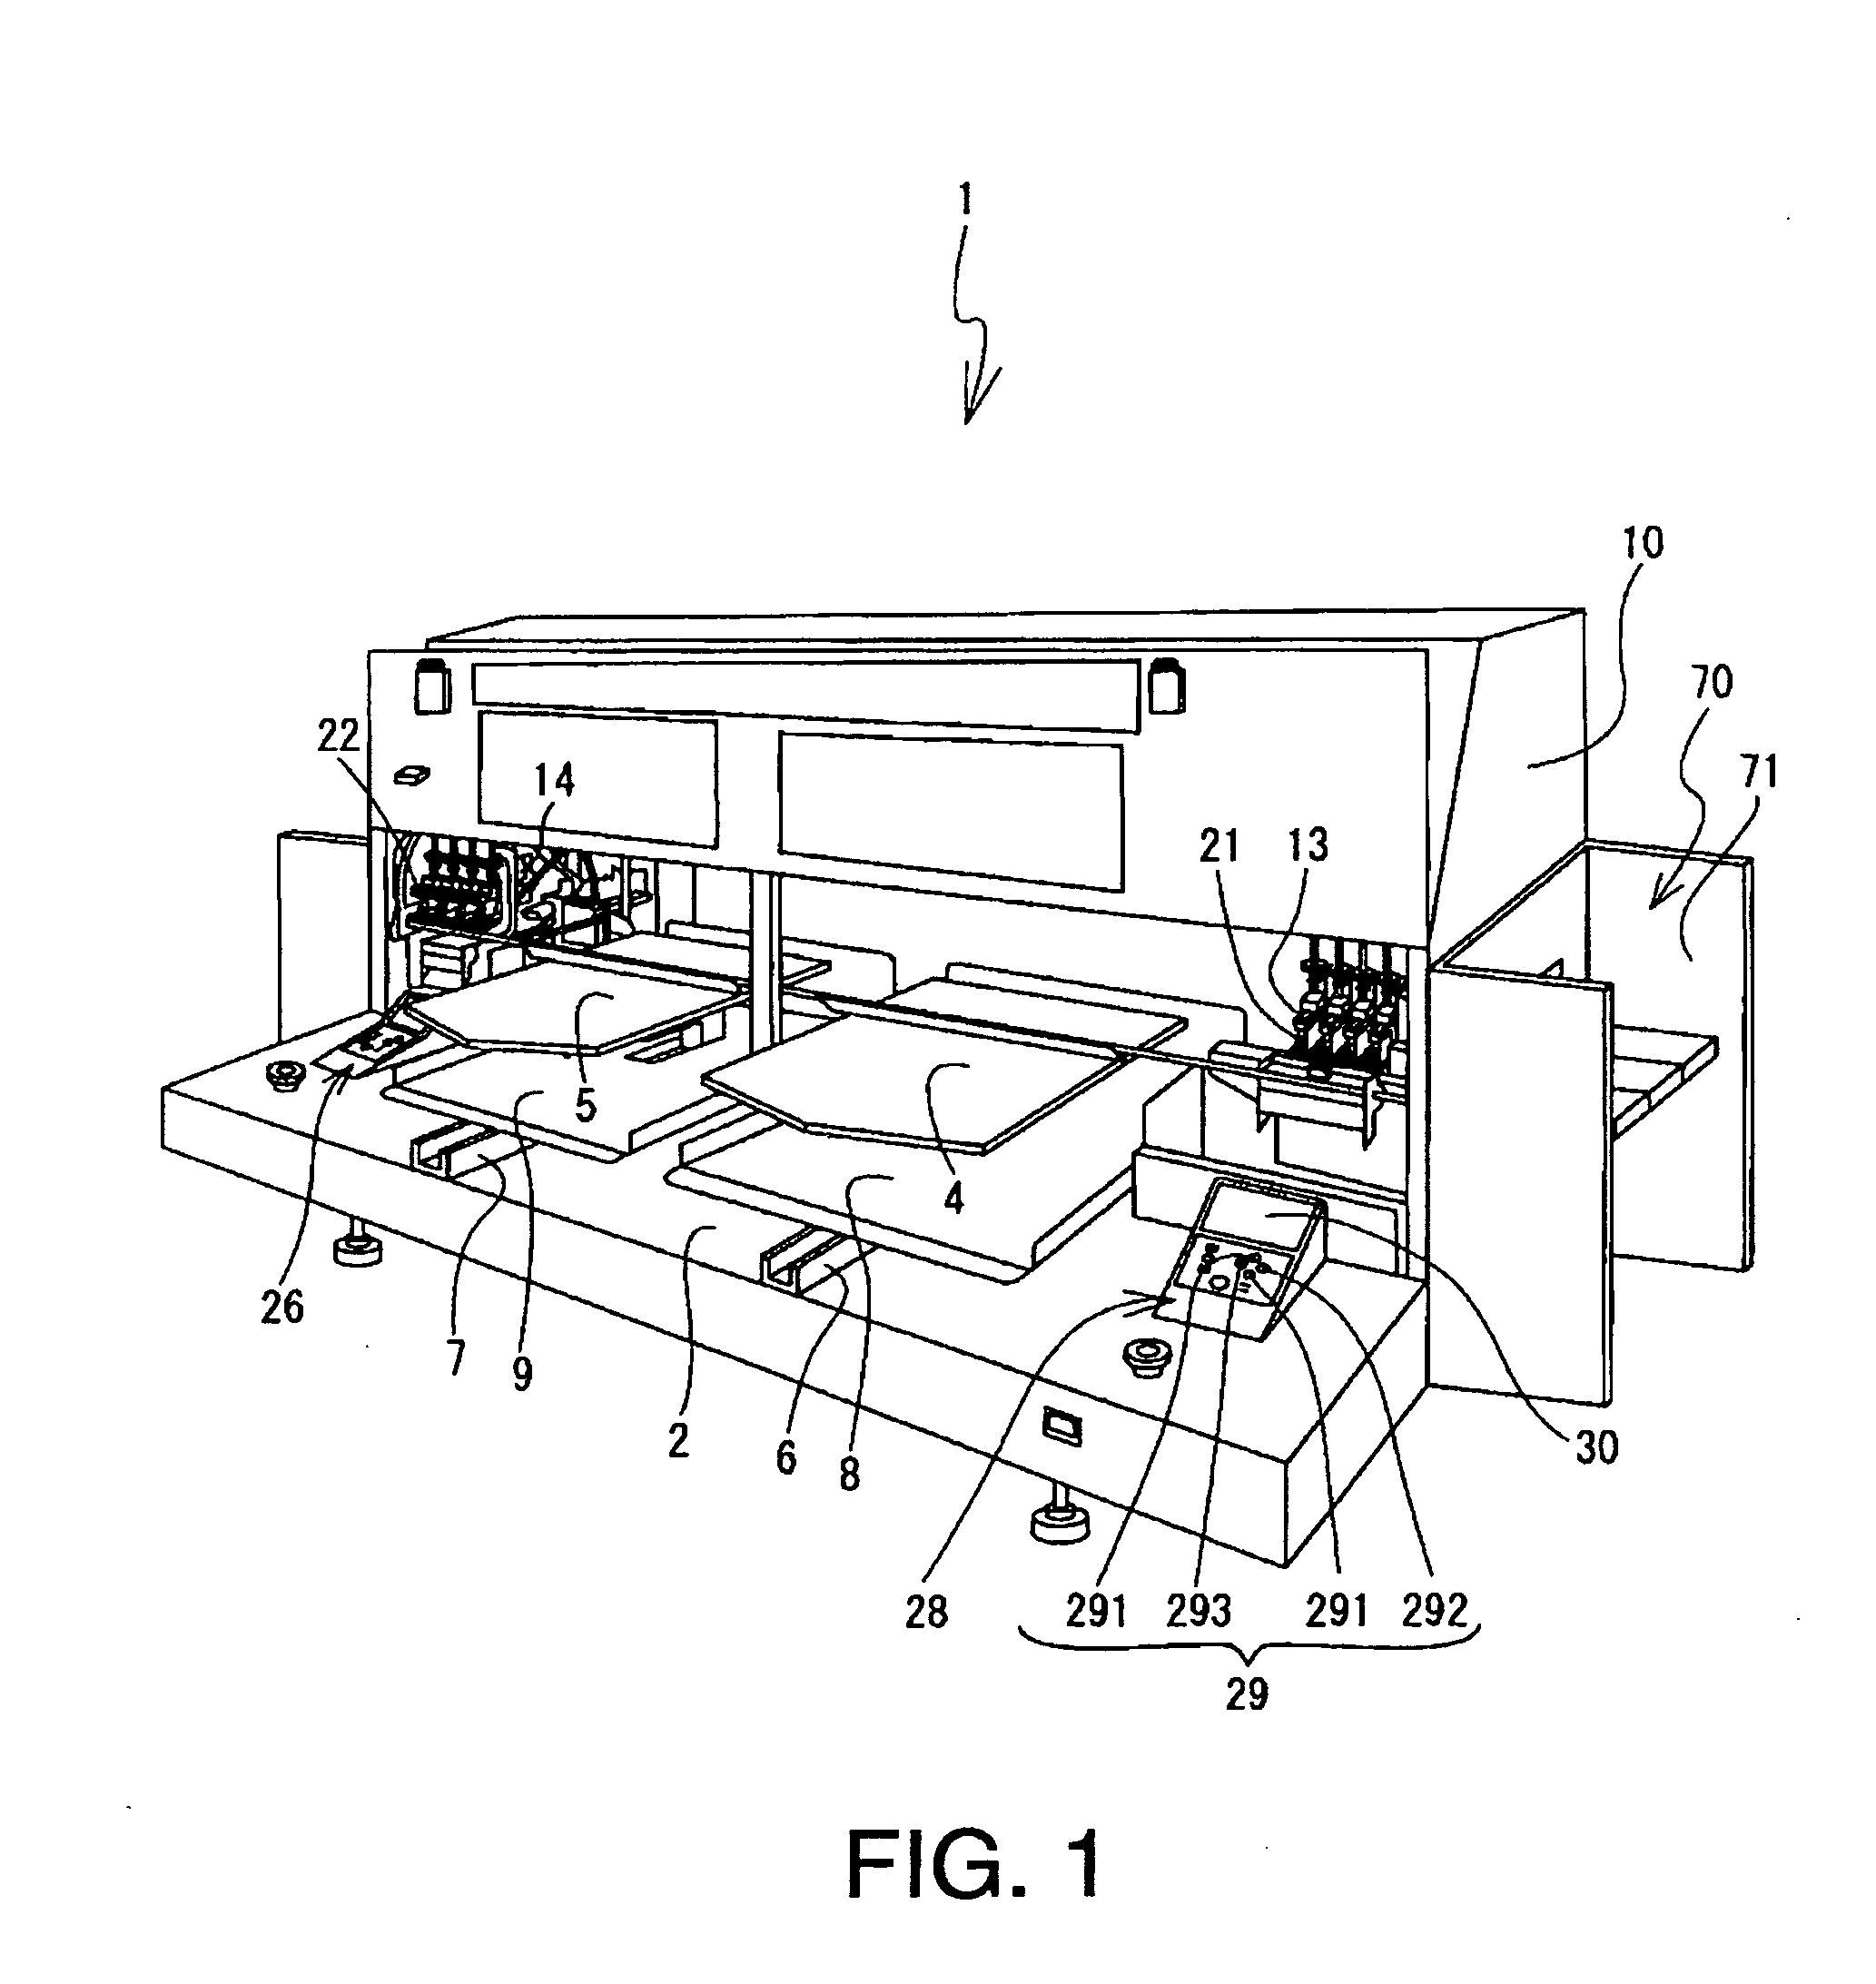 Cleaner unit, printing apparatus, and method to clean a printing apparatus